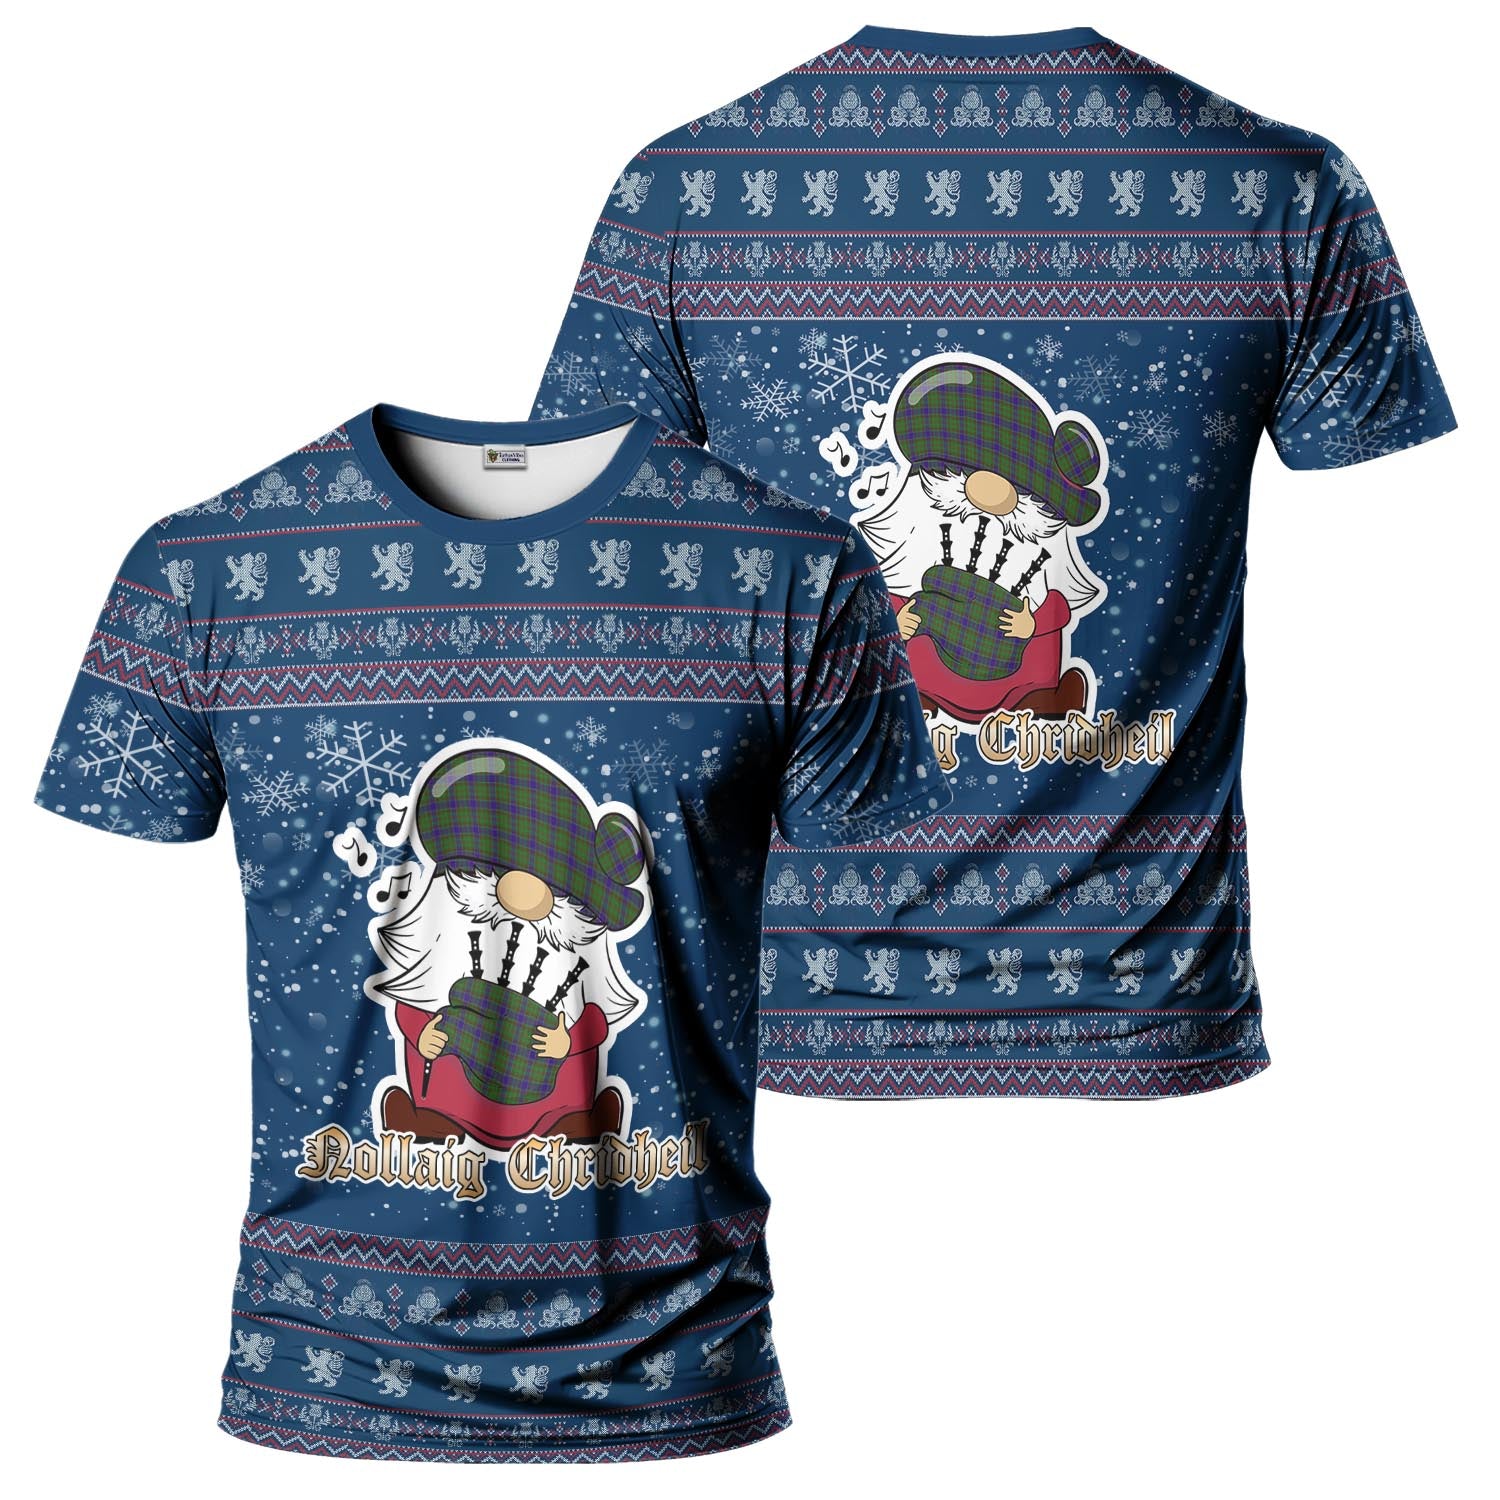 Adam Clan Christmas Family T-Shirt with Funny Gnome Playing Bagpipes Kid's Shirt Blue - Tartanvibesclothing